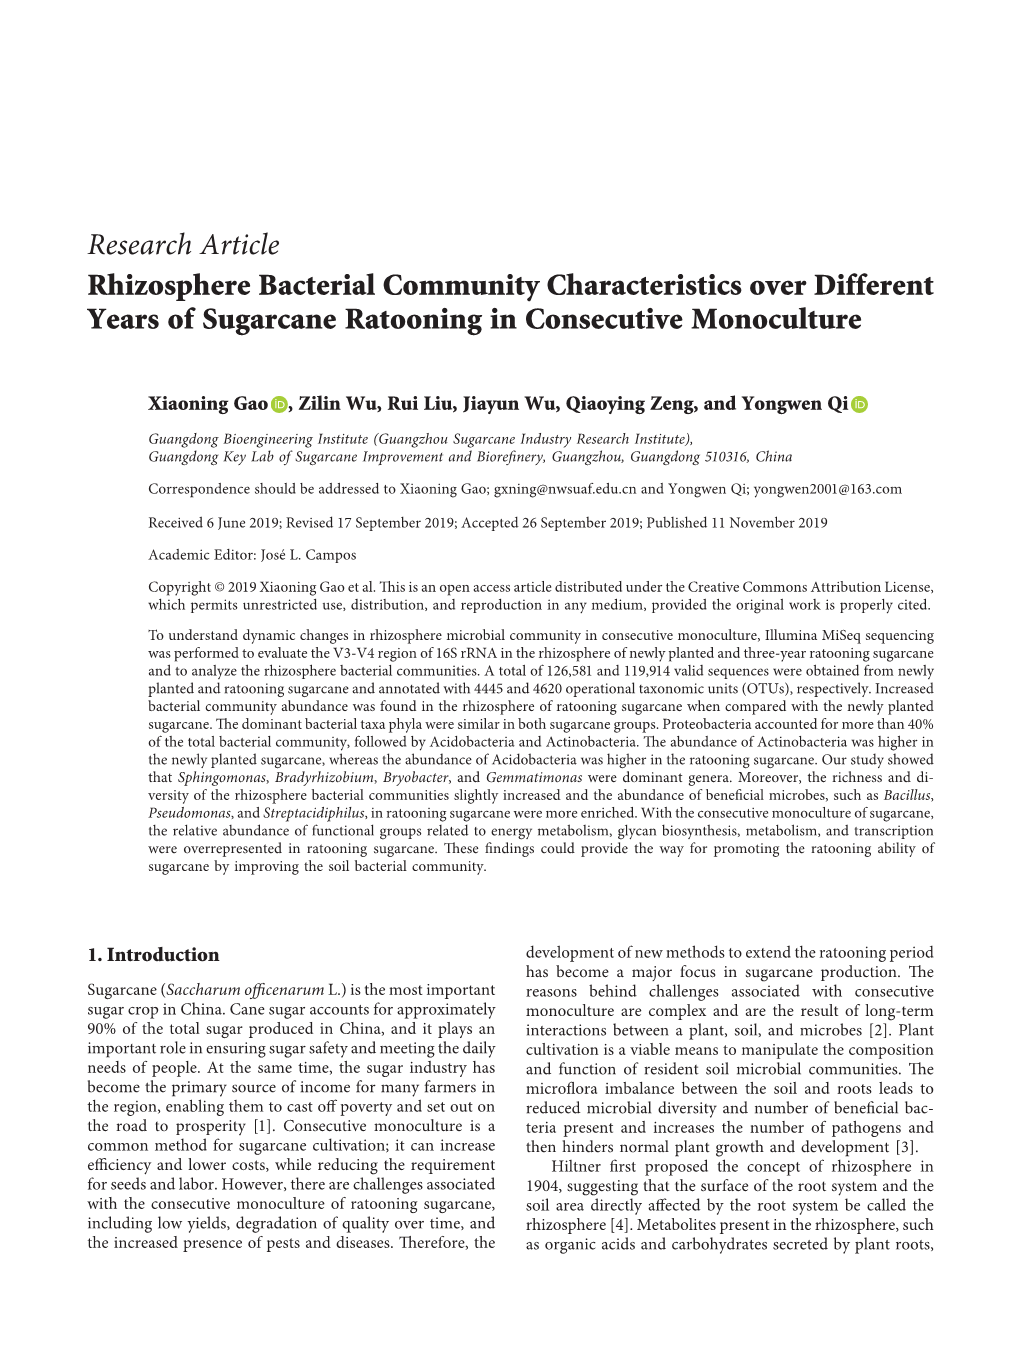 Rhizosphere Bacterial Community Characteristics Over Different Years of Sugarcane Ratooning in Consecutive Monoculture